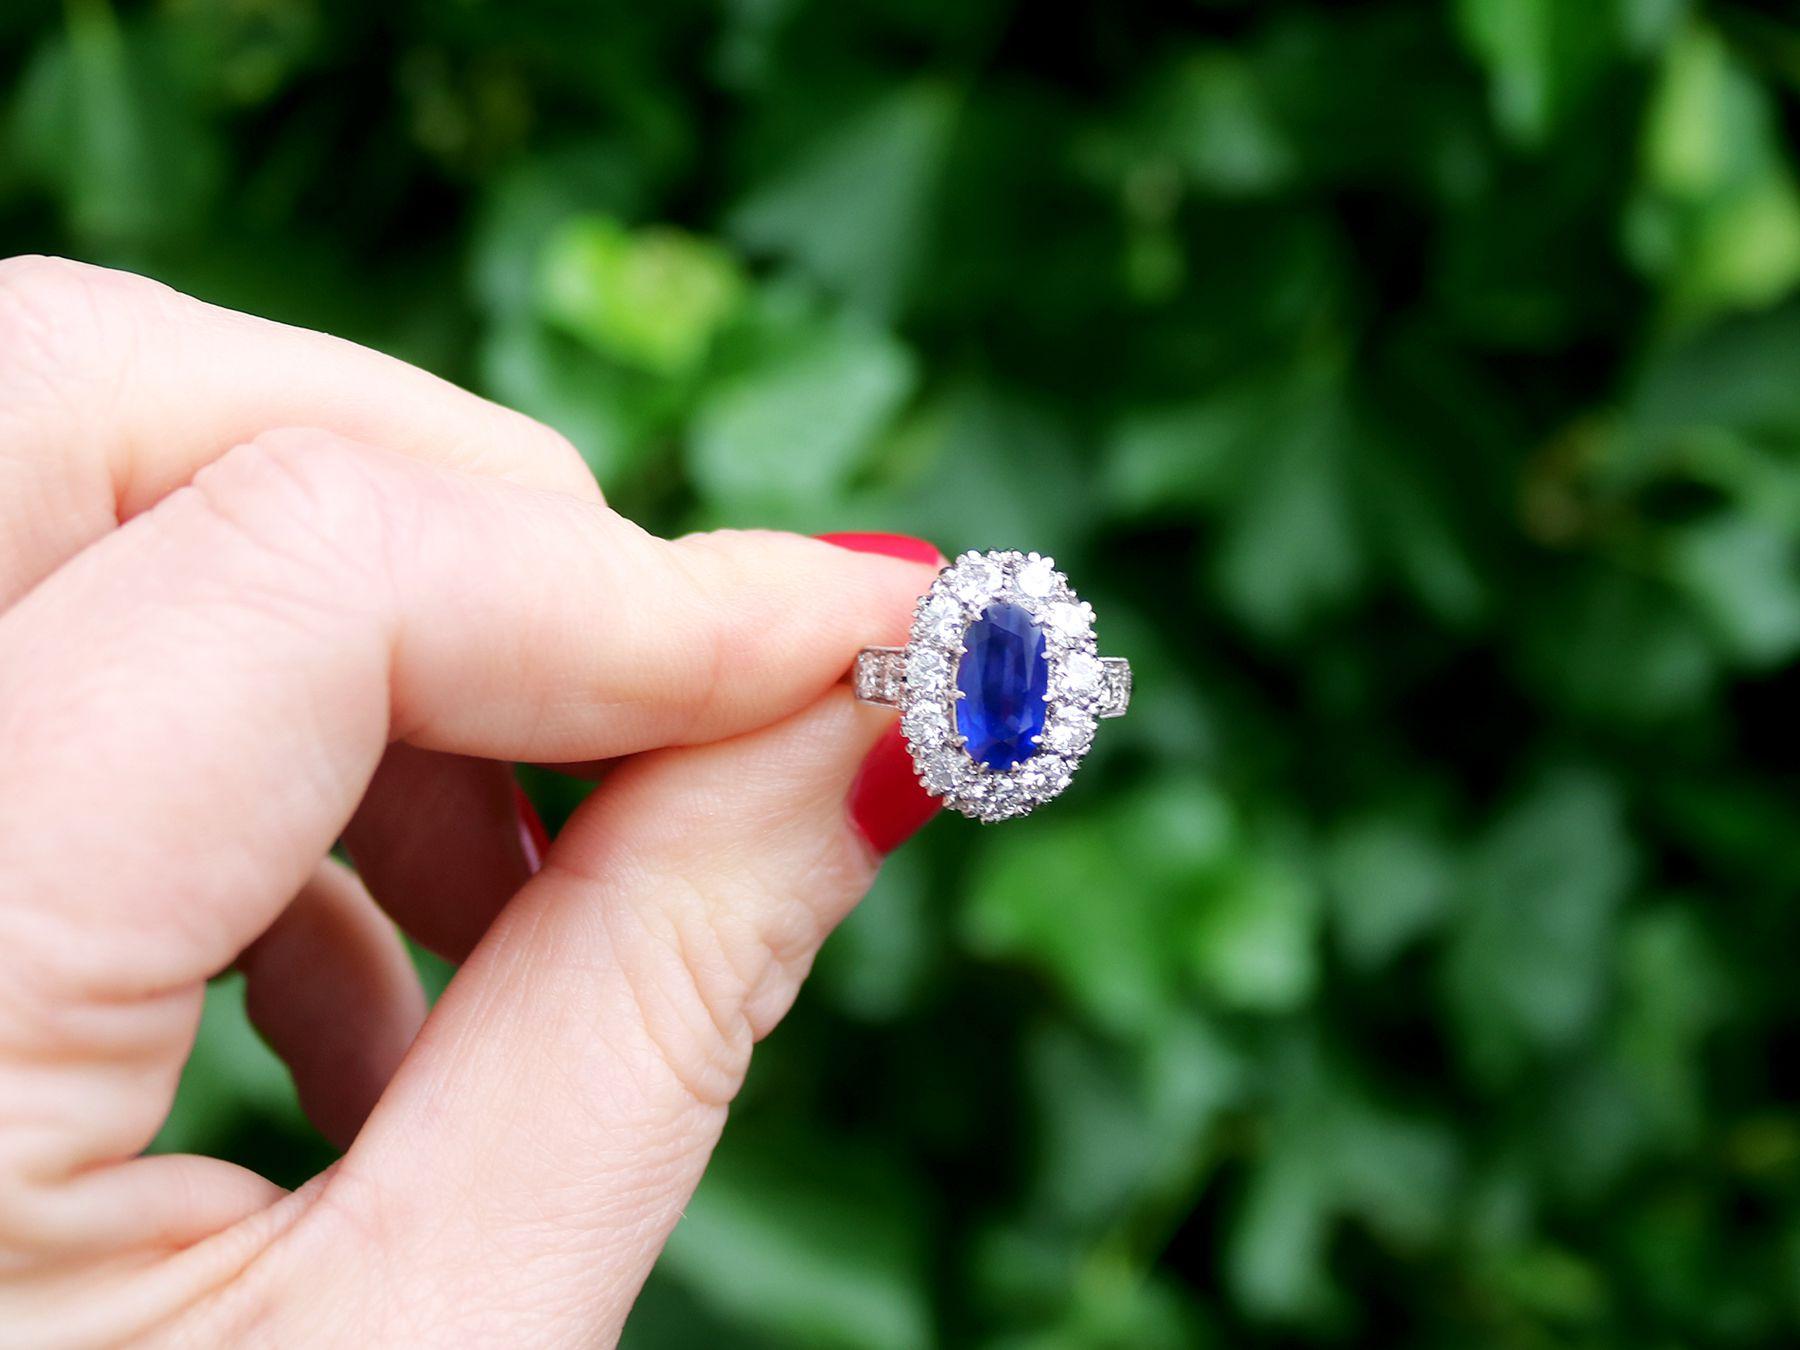 A stunning antique 3 carat Burmese sapphire and 1.83 carat diamond, 18 karat white gold and platinum set dress ring; part of our diverse antique jewelry and estate jewelry collections.

This stunning, fine and impressive sapphire ring has been